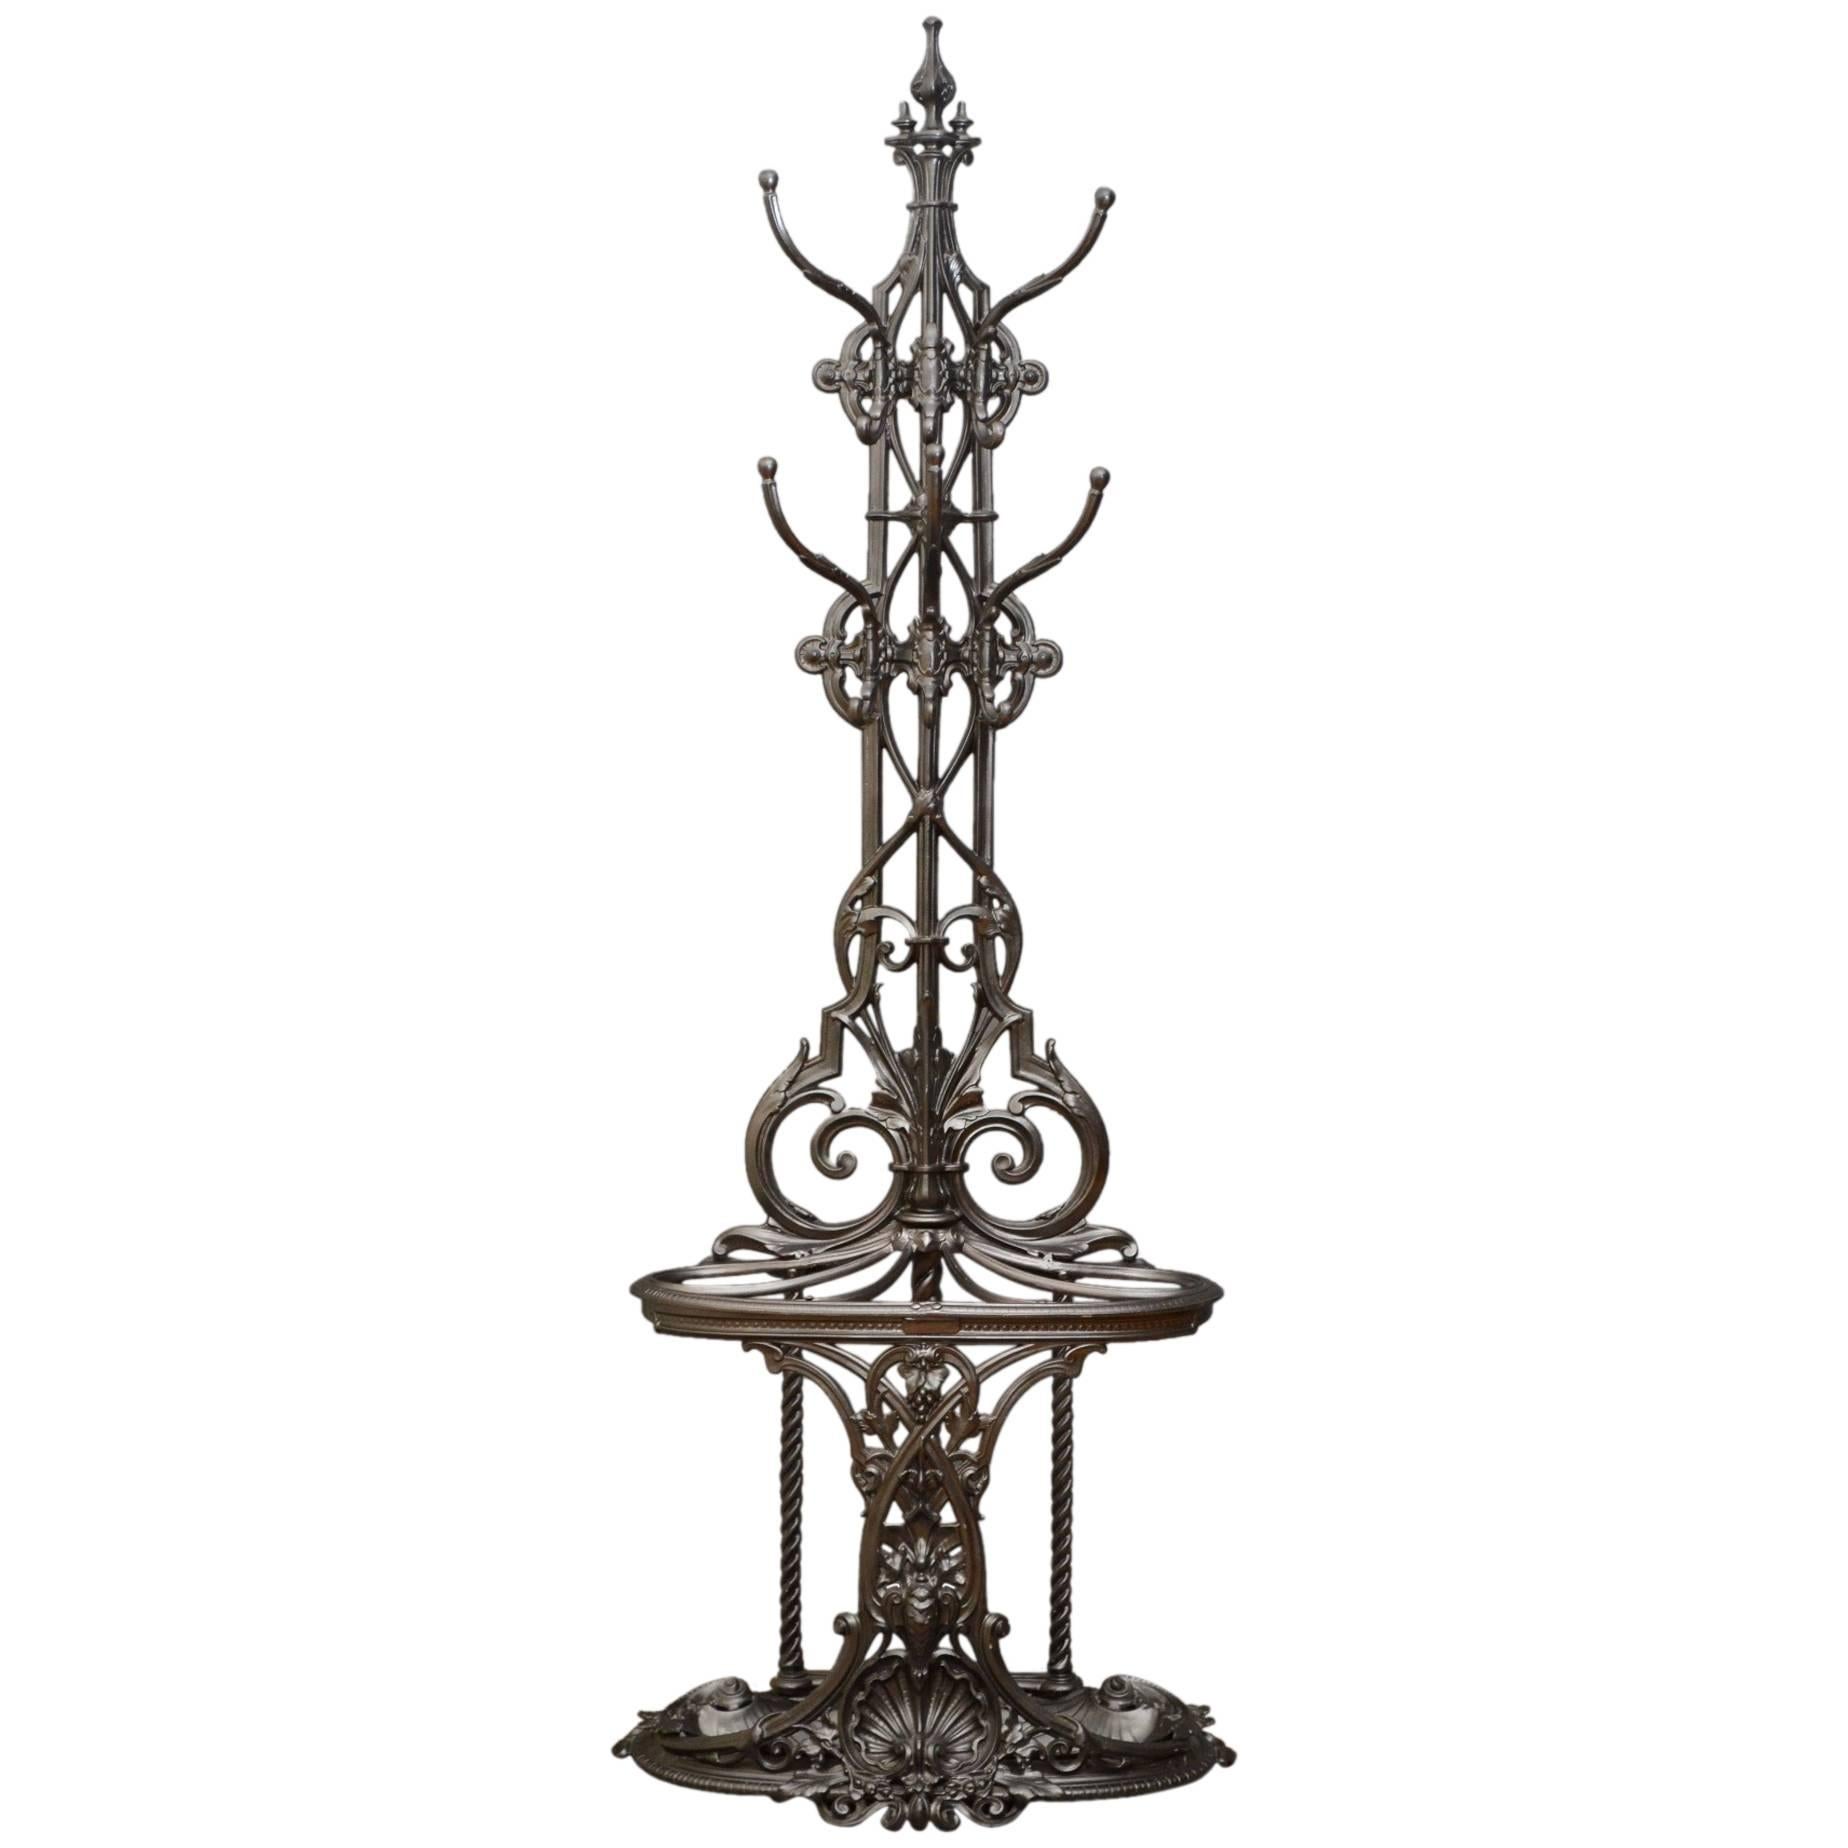 Exceptional Coalbrookdale Cast Iron Hall Stand, Coat Stand